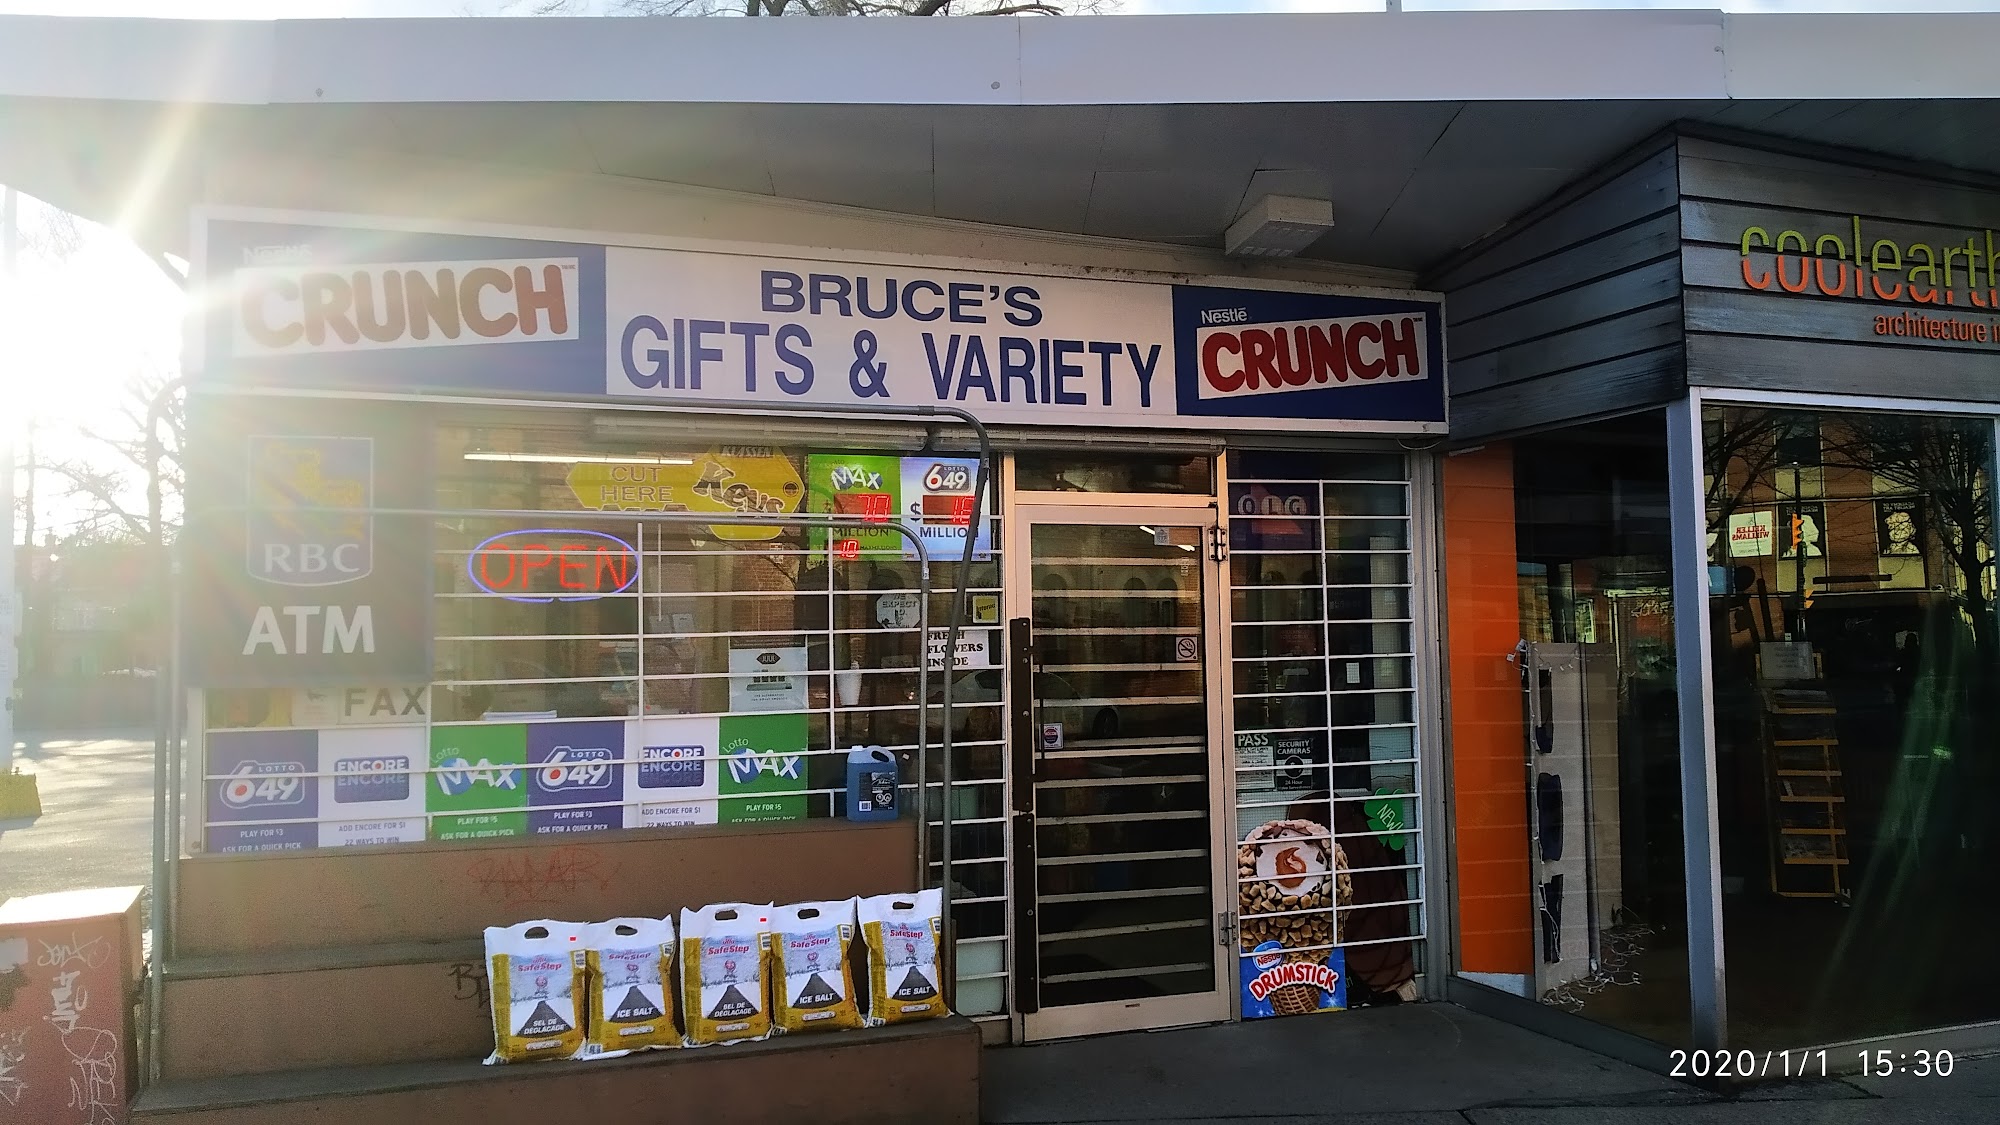 Bruce's Gifts & Variety